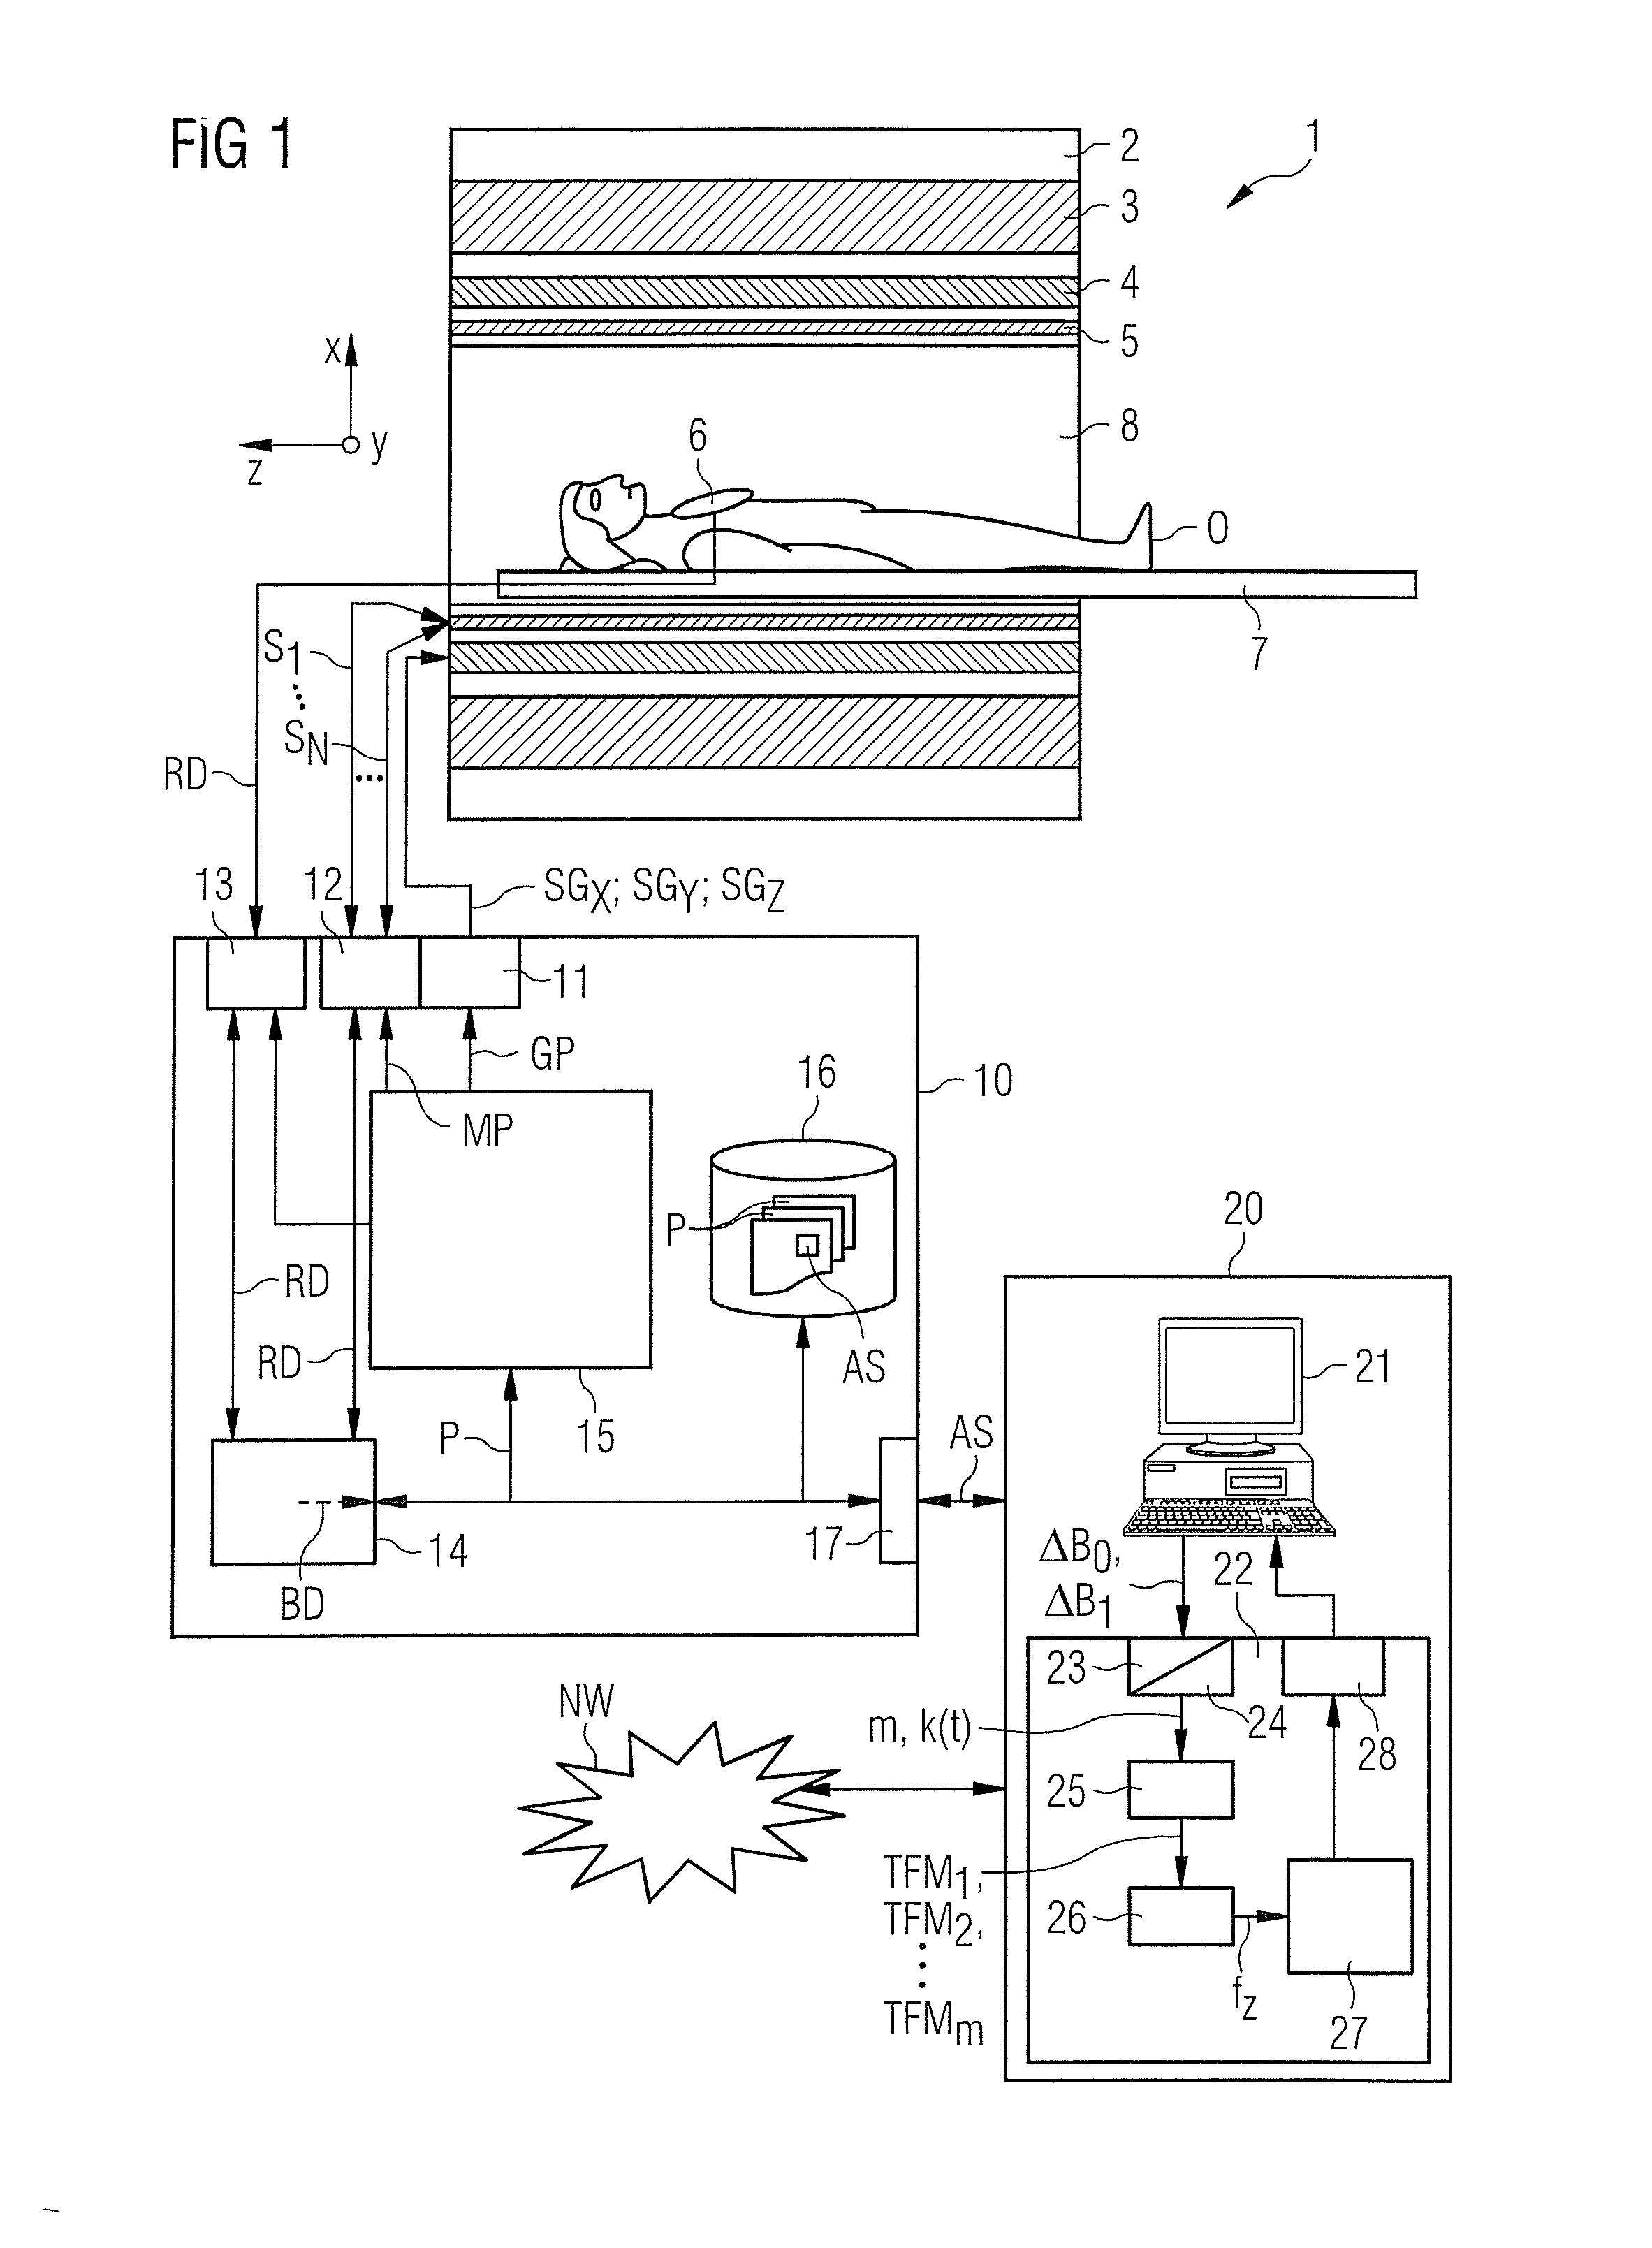 Method and apparatus for determination of a magnetic resonance system control sequence